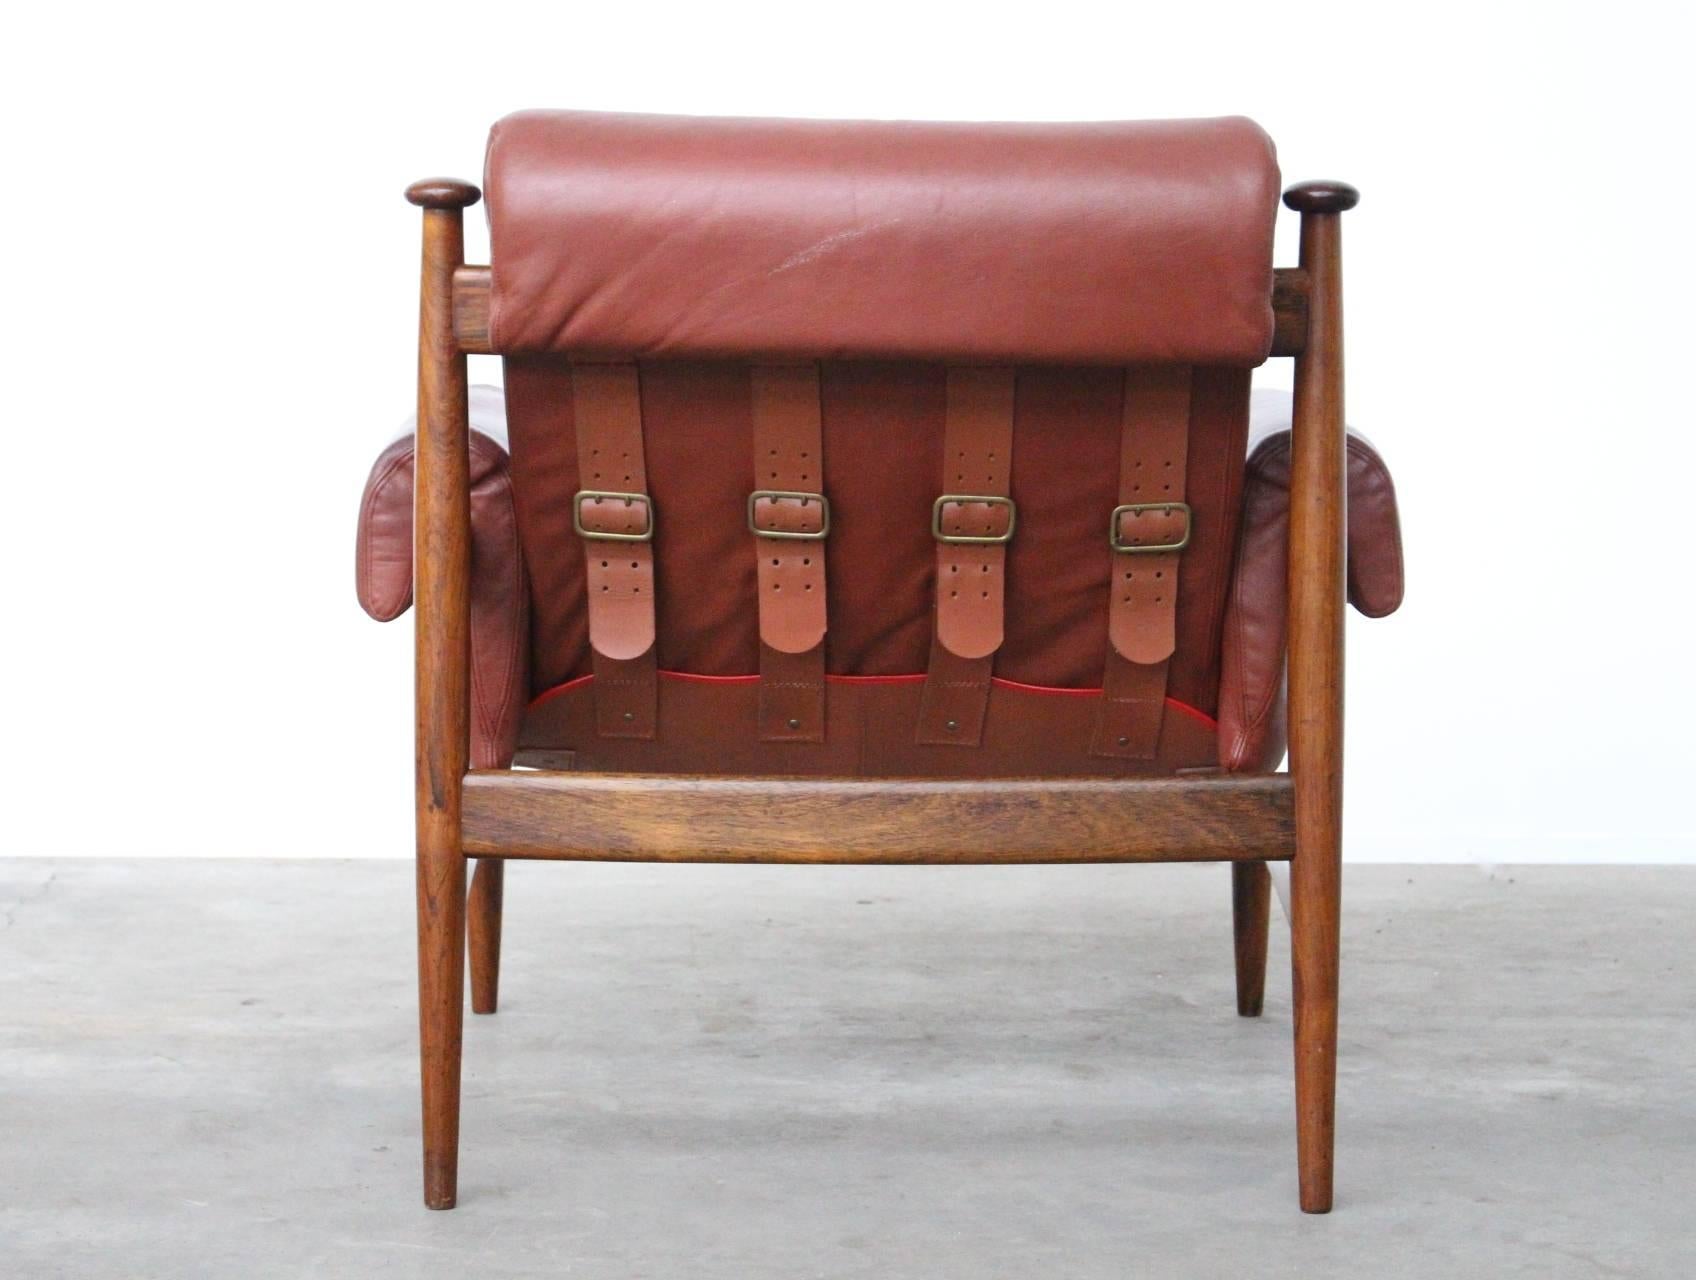 Mid-20th Century Rare Easy Chair Model Amiral Designed by Eric Merthen for Ire Mobler, Sweden